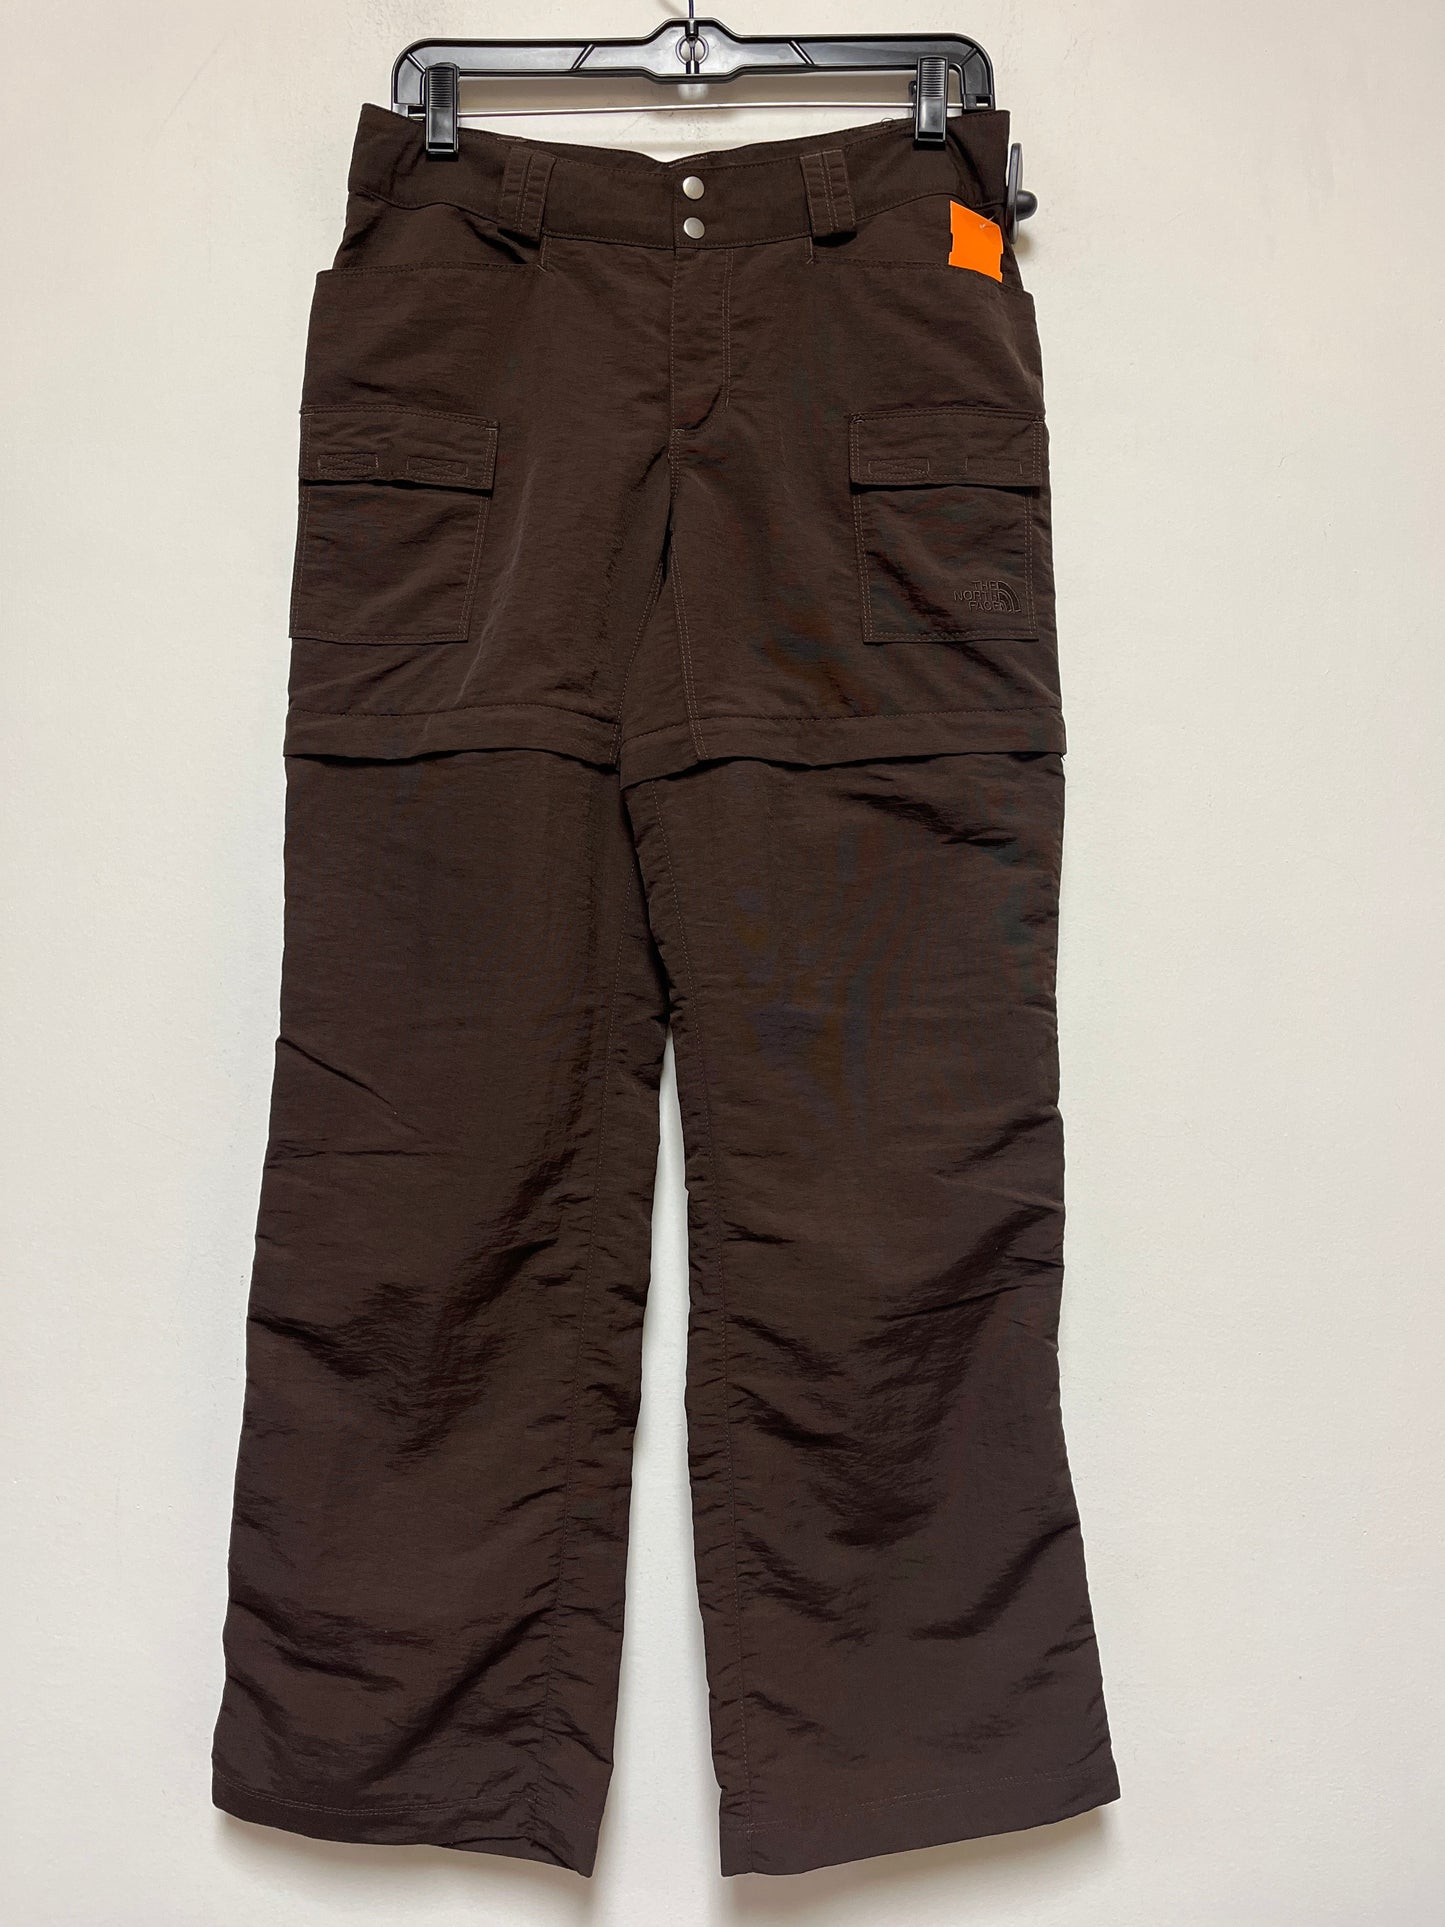 Pants Cargo & Utility By North Face  Size: 4